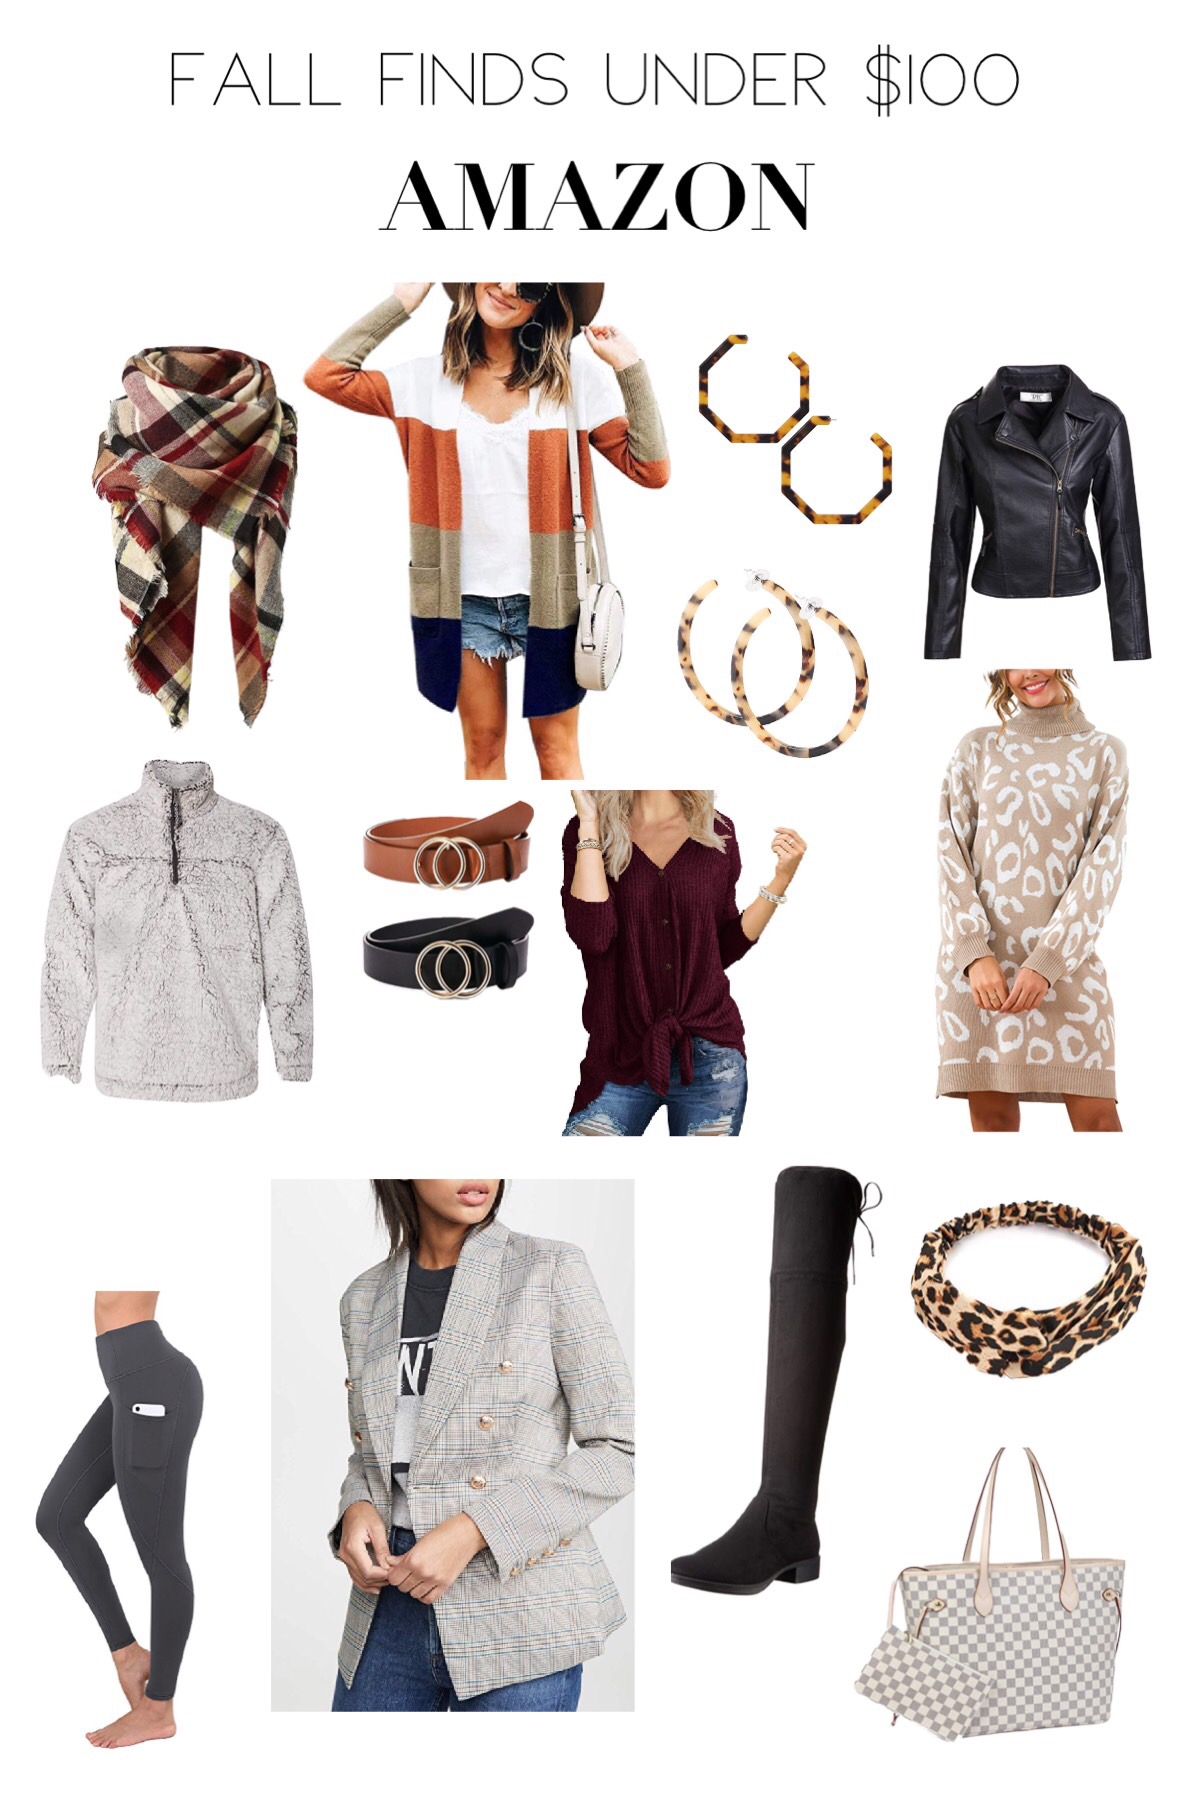 Amazon Fall Outfits. Casual fall style. Under $100 looks